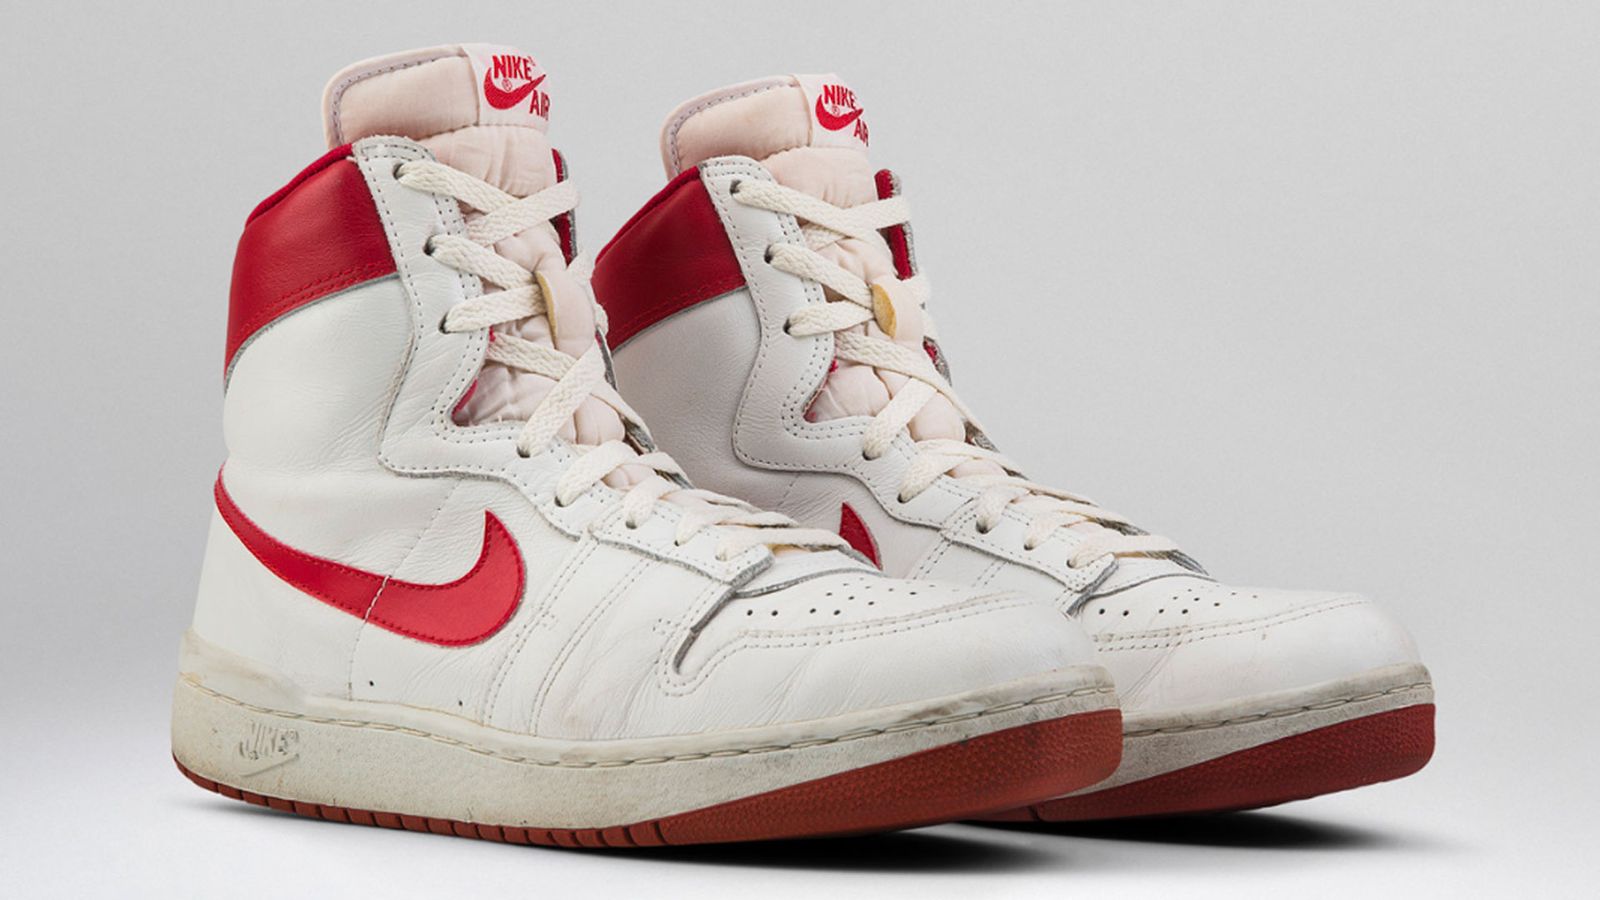 Image of Nike Air Ship a pair of white and red high-top Air Ship sneakers.